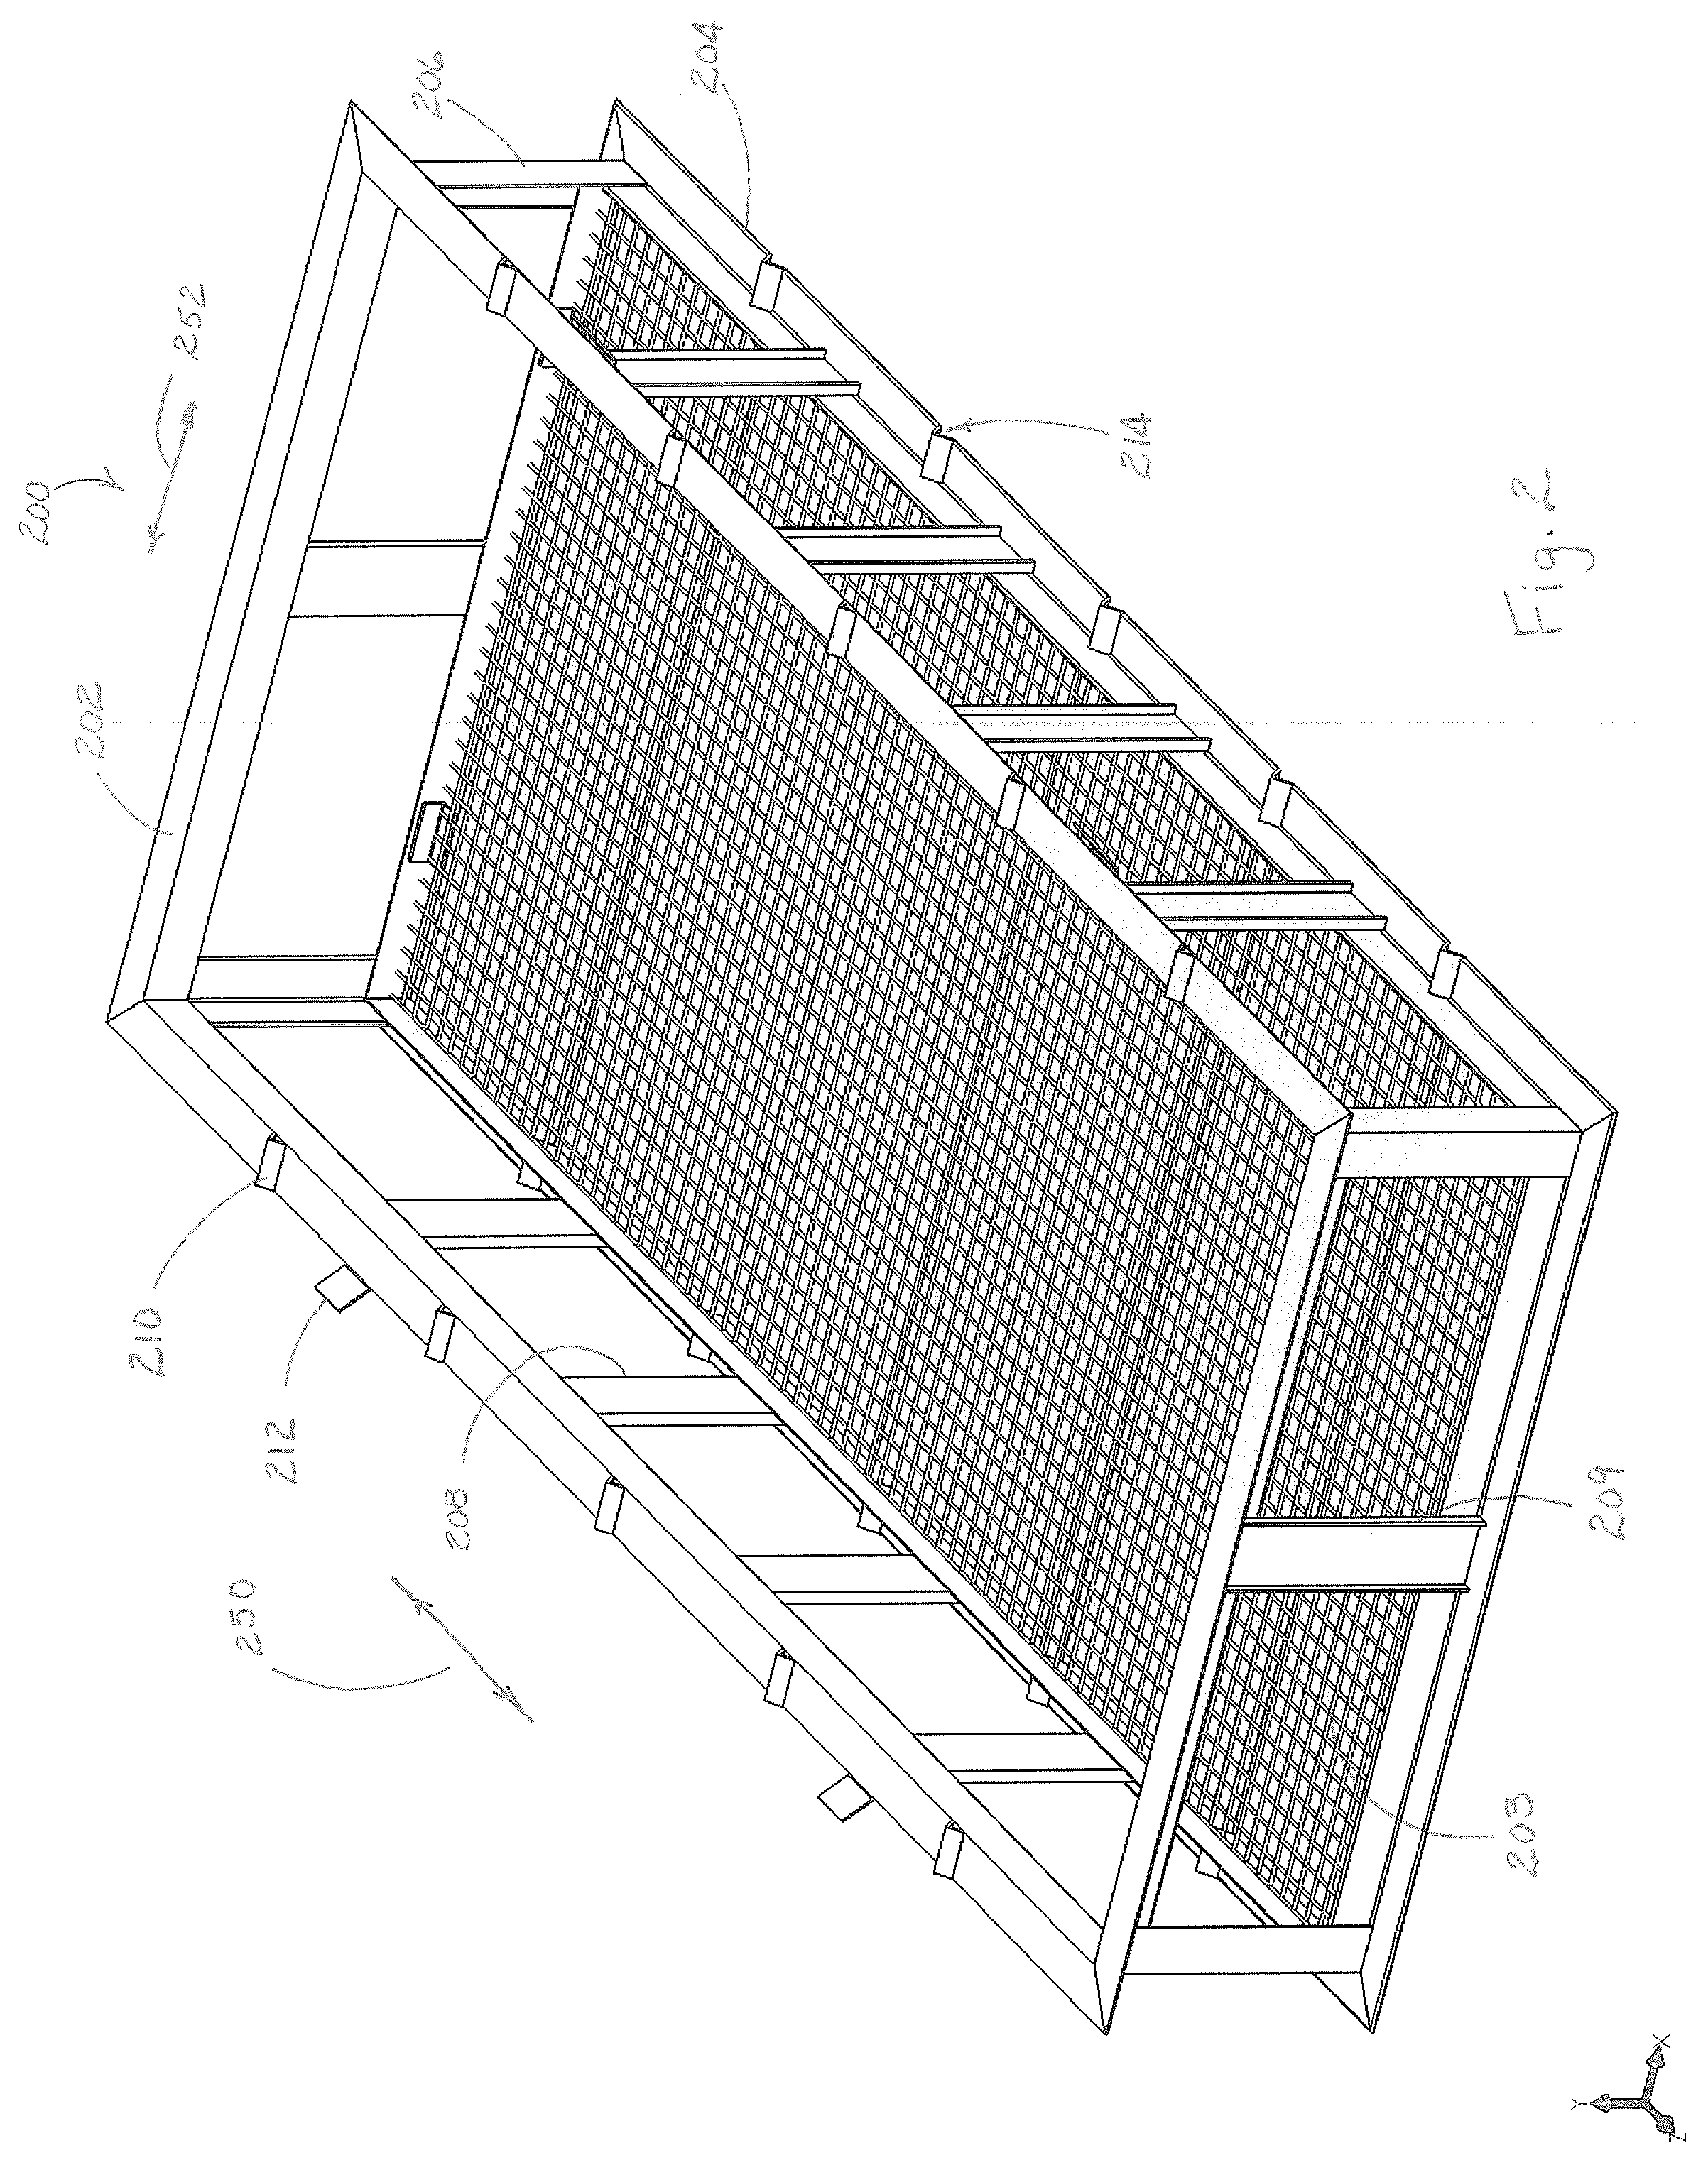 Stackable tray system and method to load, transport, stun and singulate poultry